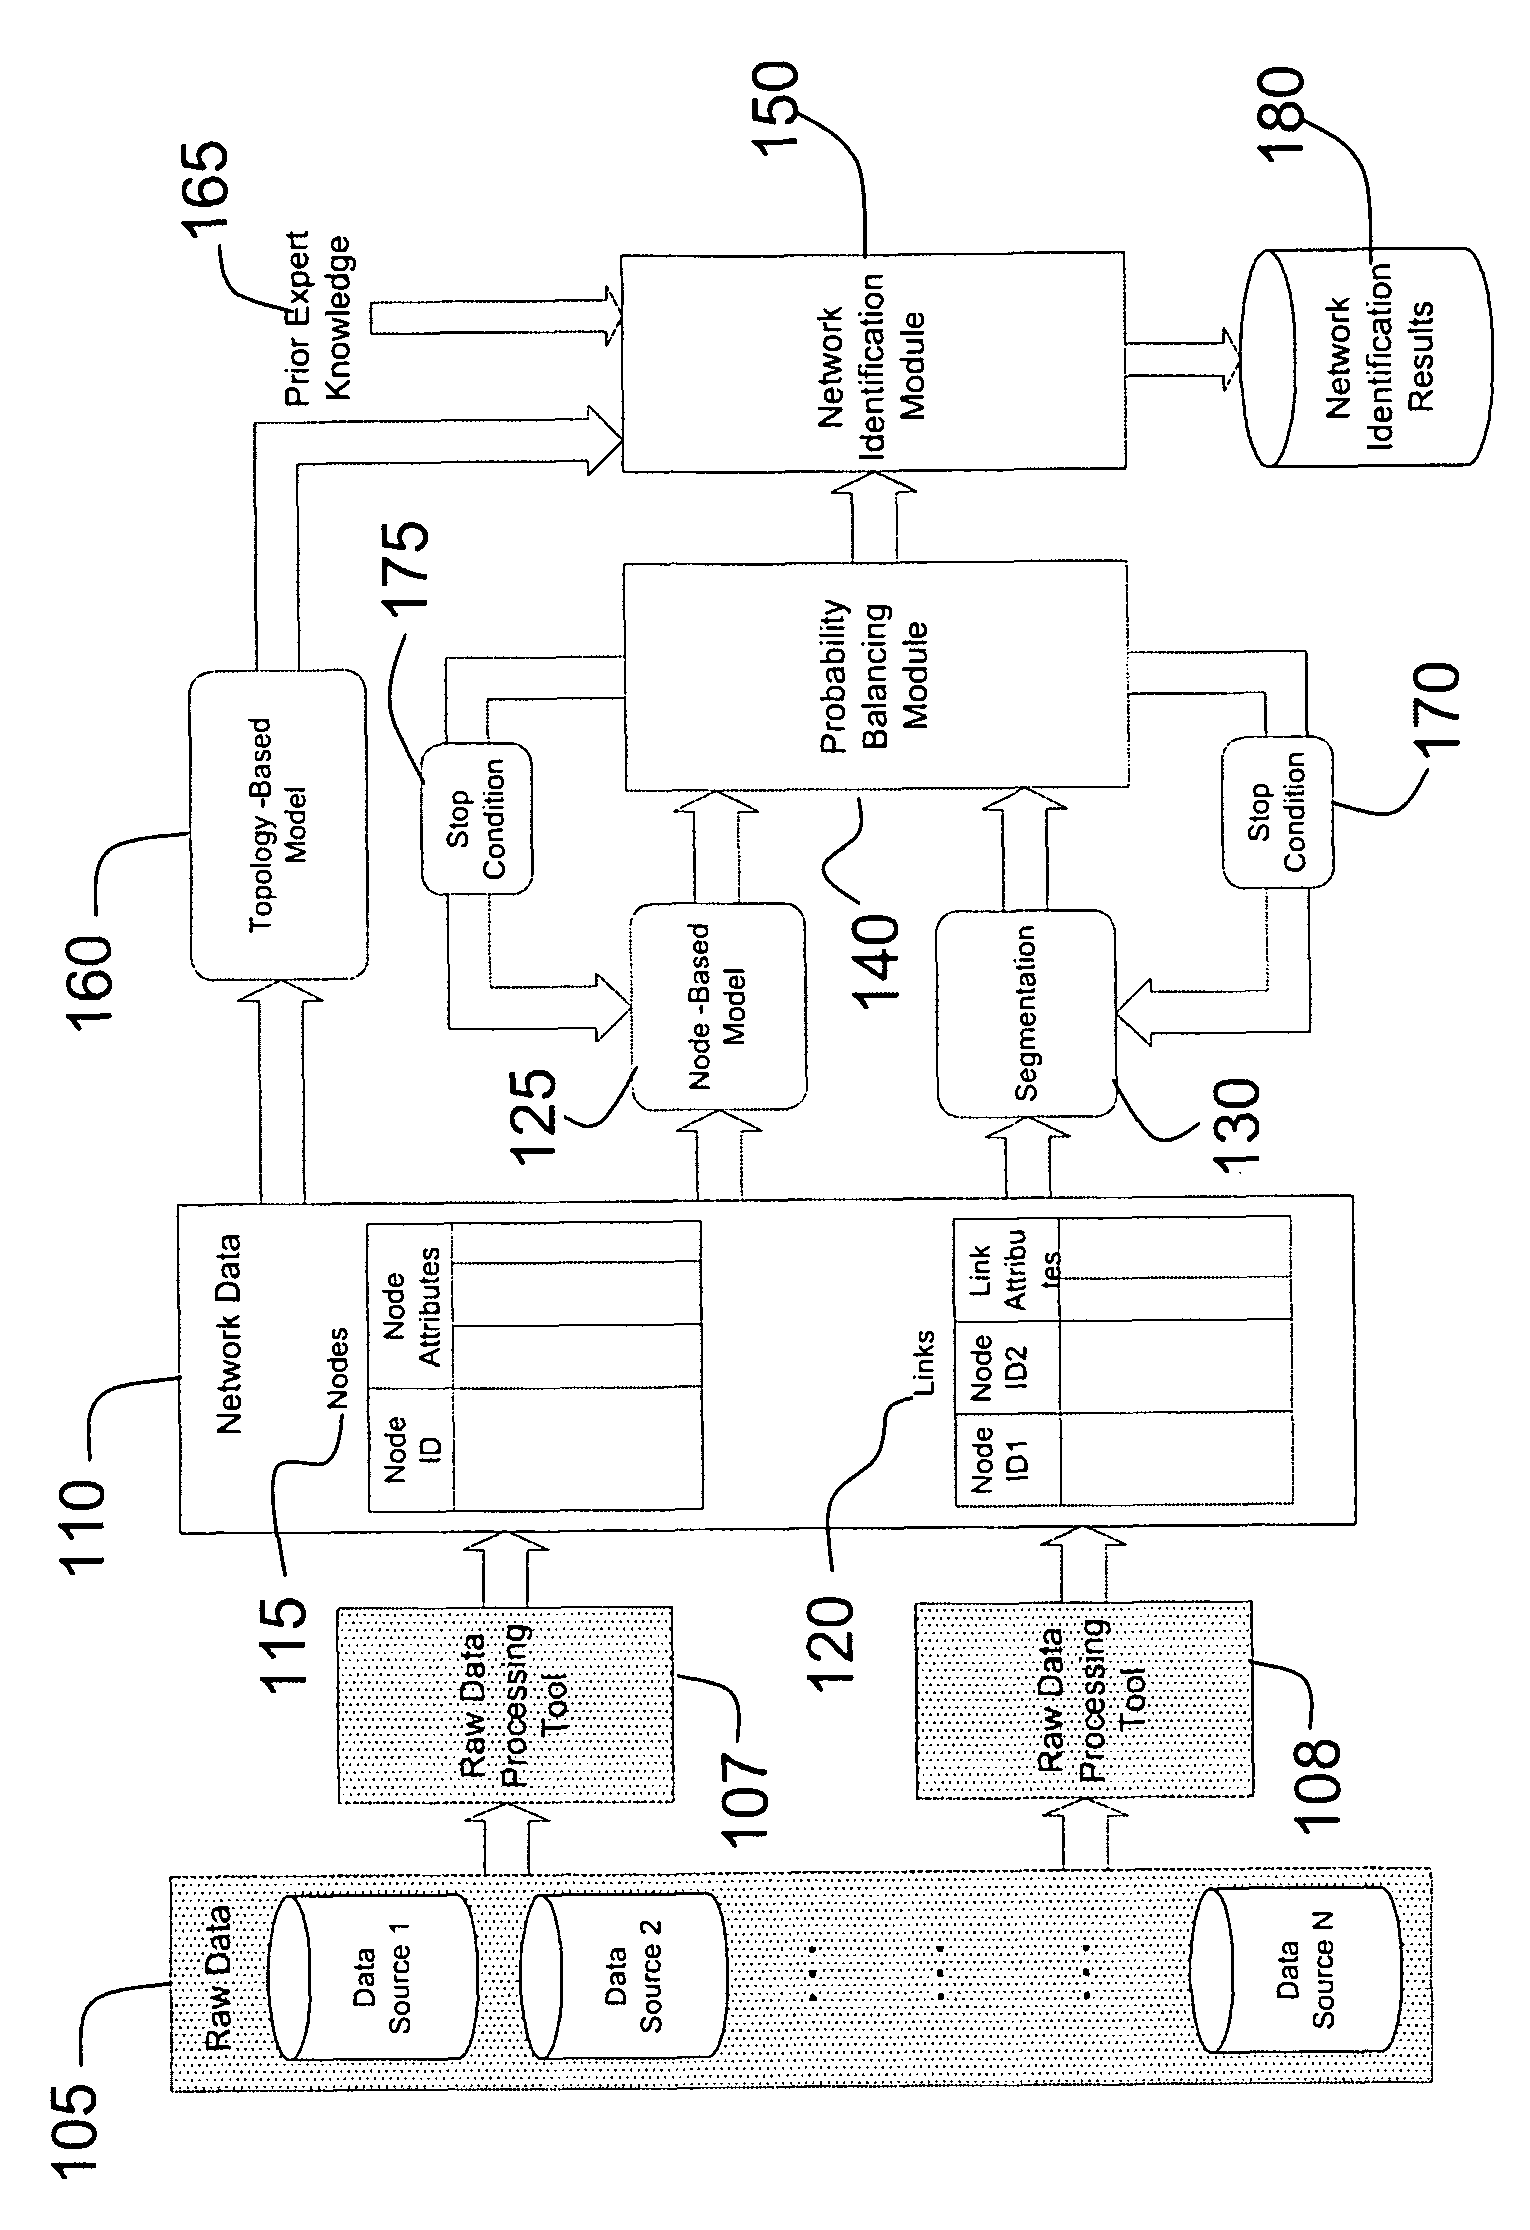 System and method for identification of unknown illicit networks